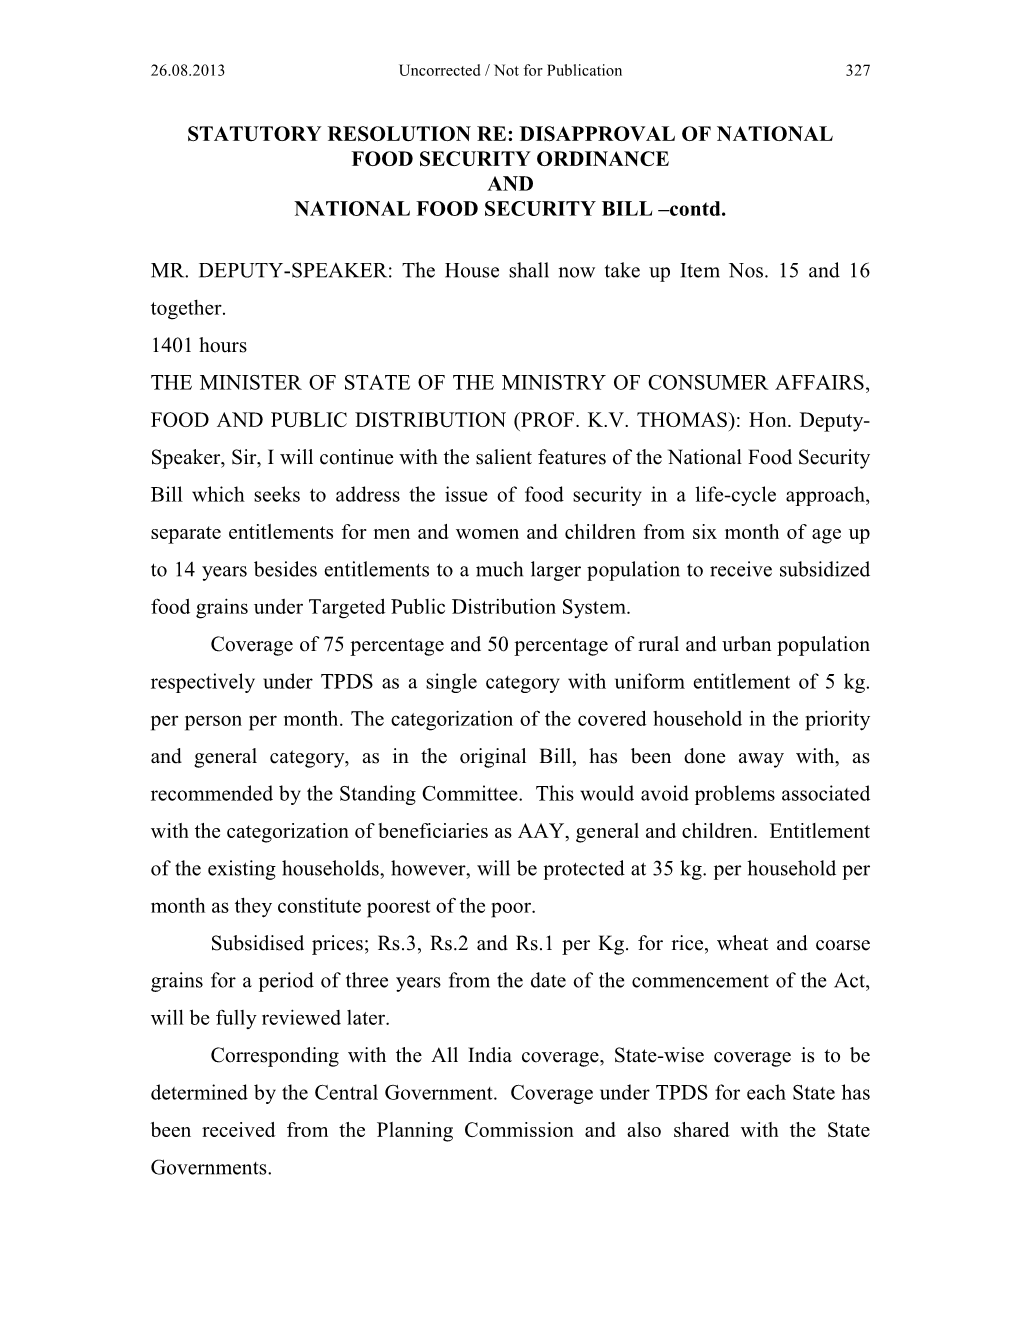 STATUTORY RESOLUTION RE: DISAPPROVAL of NATIONAL FOOD SECURITY ORDINANCE and NATIONAL FOOD SECURITY BILL –Contd. MR. DEPUTY-S